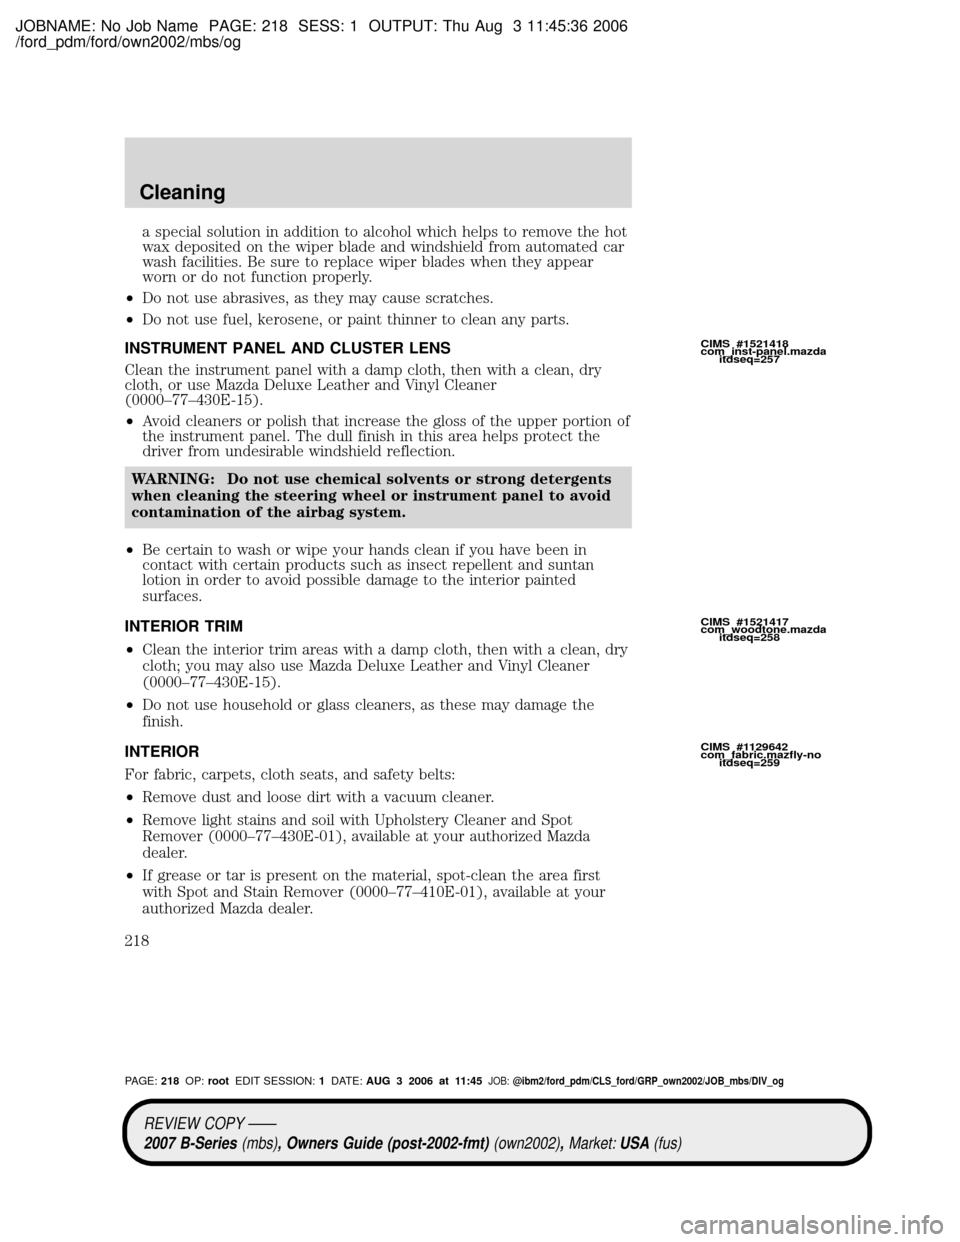 MAZDA MODEL B2300 TRUCK 2007  Owners Manual (in English) JOBNAME: No Job Name PAGE: 218 SESS: 1 OUTPUT: Thu Aug 3 11:45:36 2006
/ford_pdm/ford/own2002/mbs/og
a special solution in addition to alcohol which helps to remove the hot
wax deposited on the wiper 